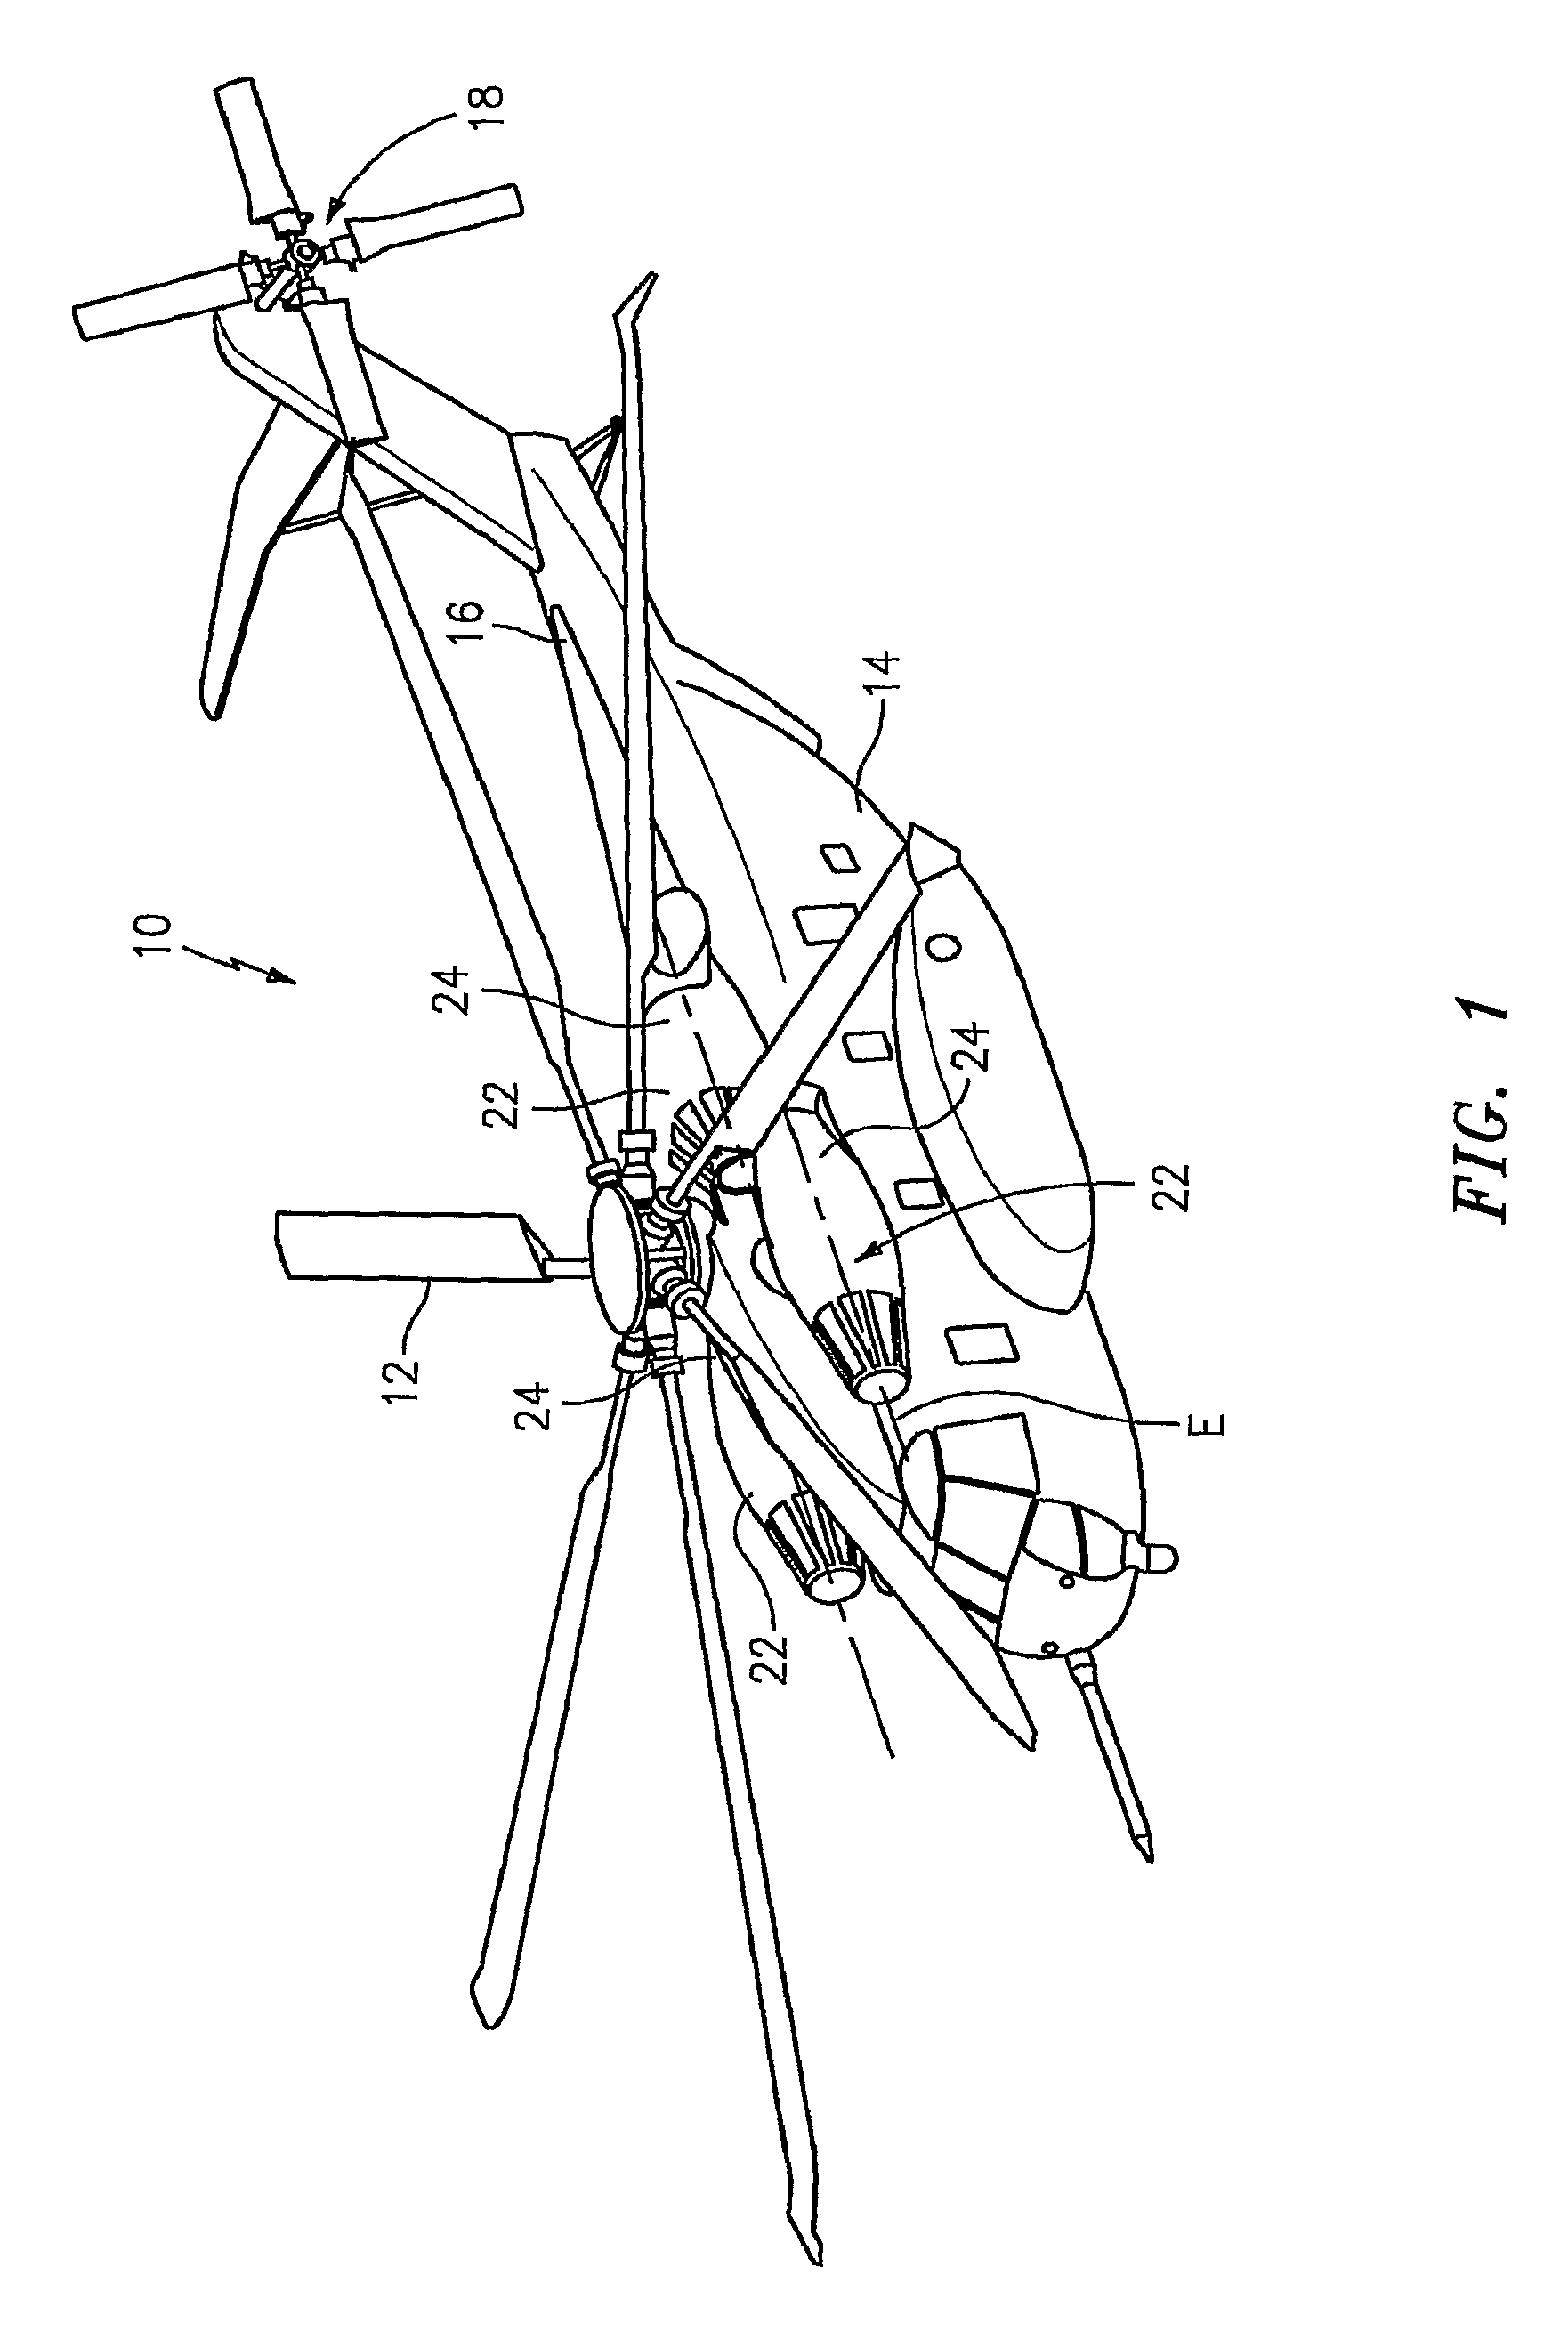 Infrared suppression system with spiral septum